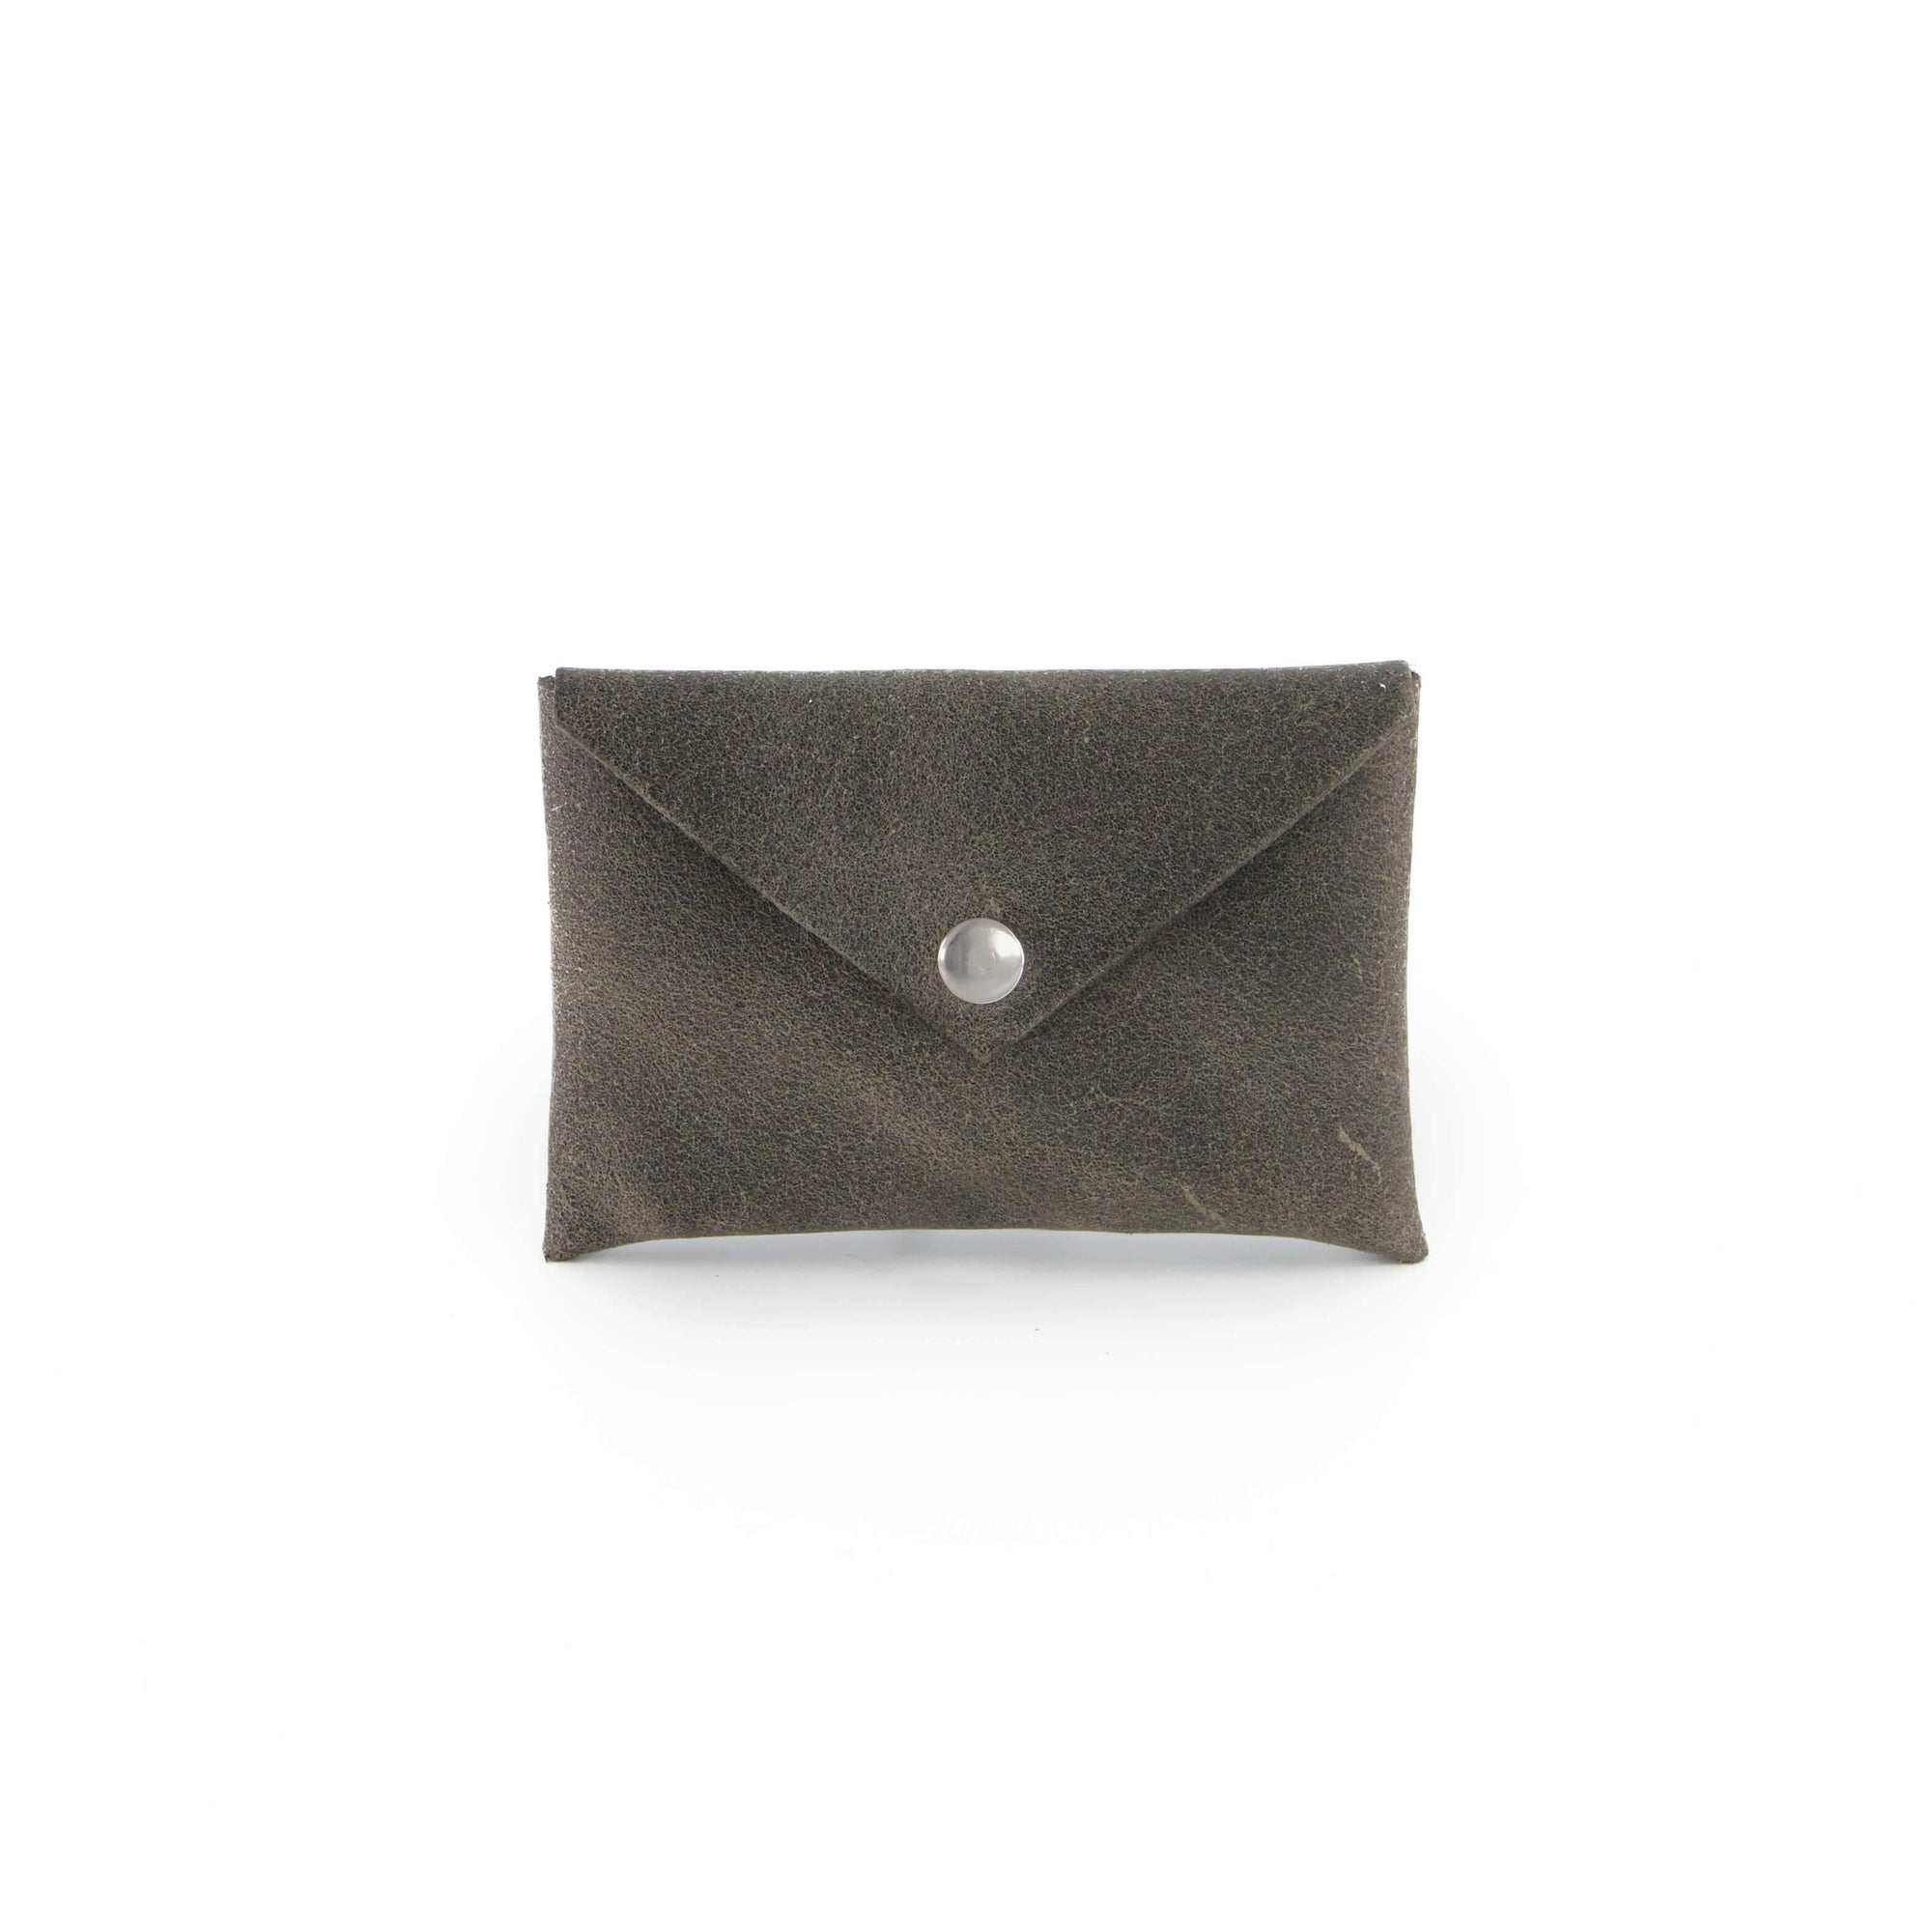 leather cards case, leather pouch, leather envelope pouch, small gift, accessories, gray leather case, cards holder case, handmade leather good, gift for her, gift for her, cards holder, coin purse, leather wallet, monogram, custom business cards, handmade cards holder, personalized, business cards case, Credit Card Wallet